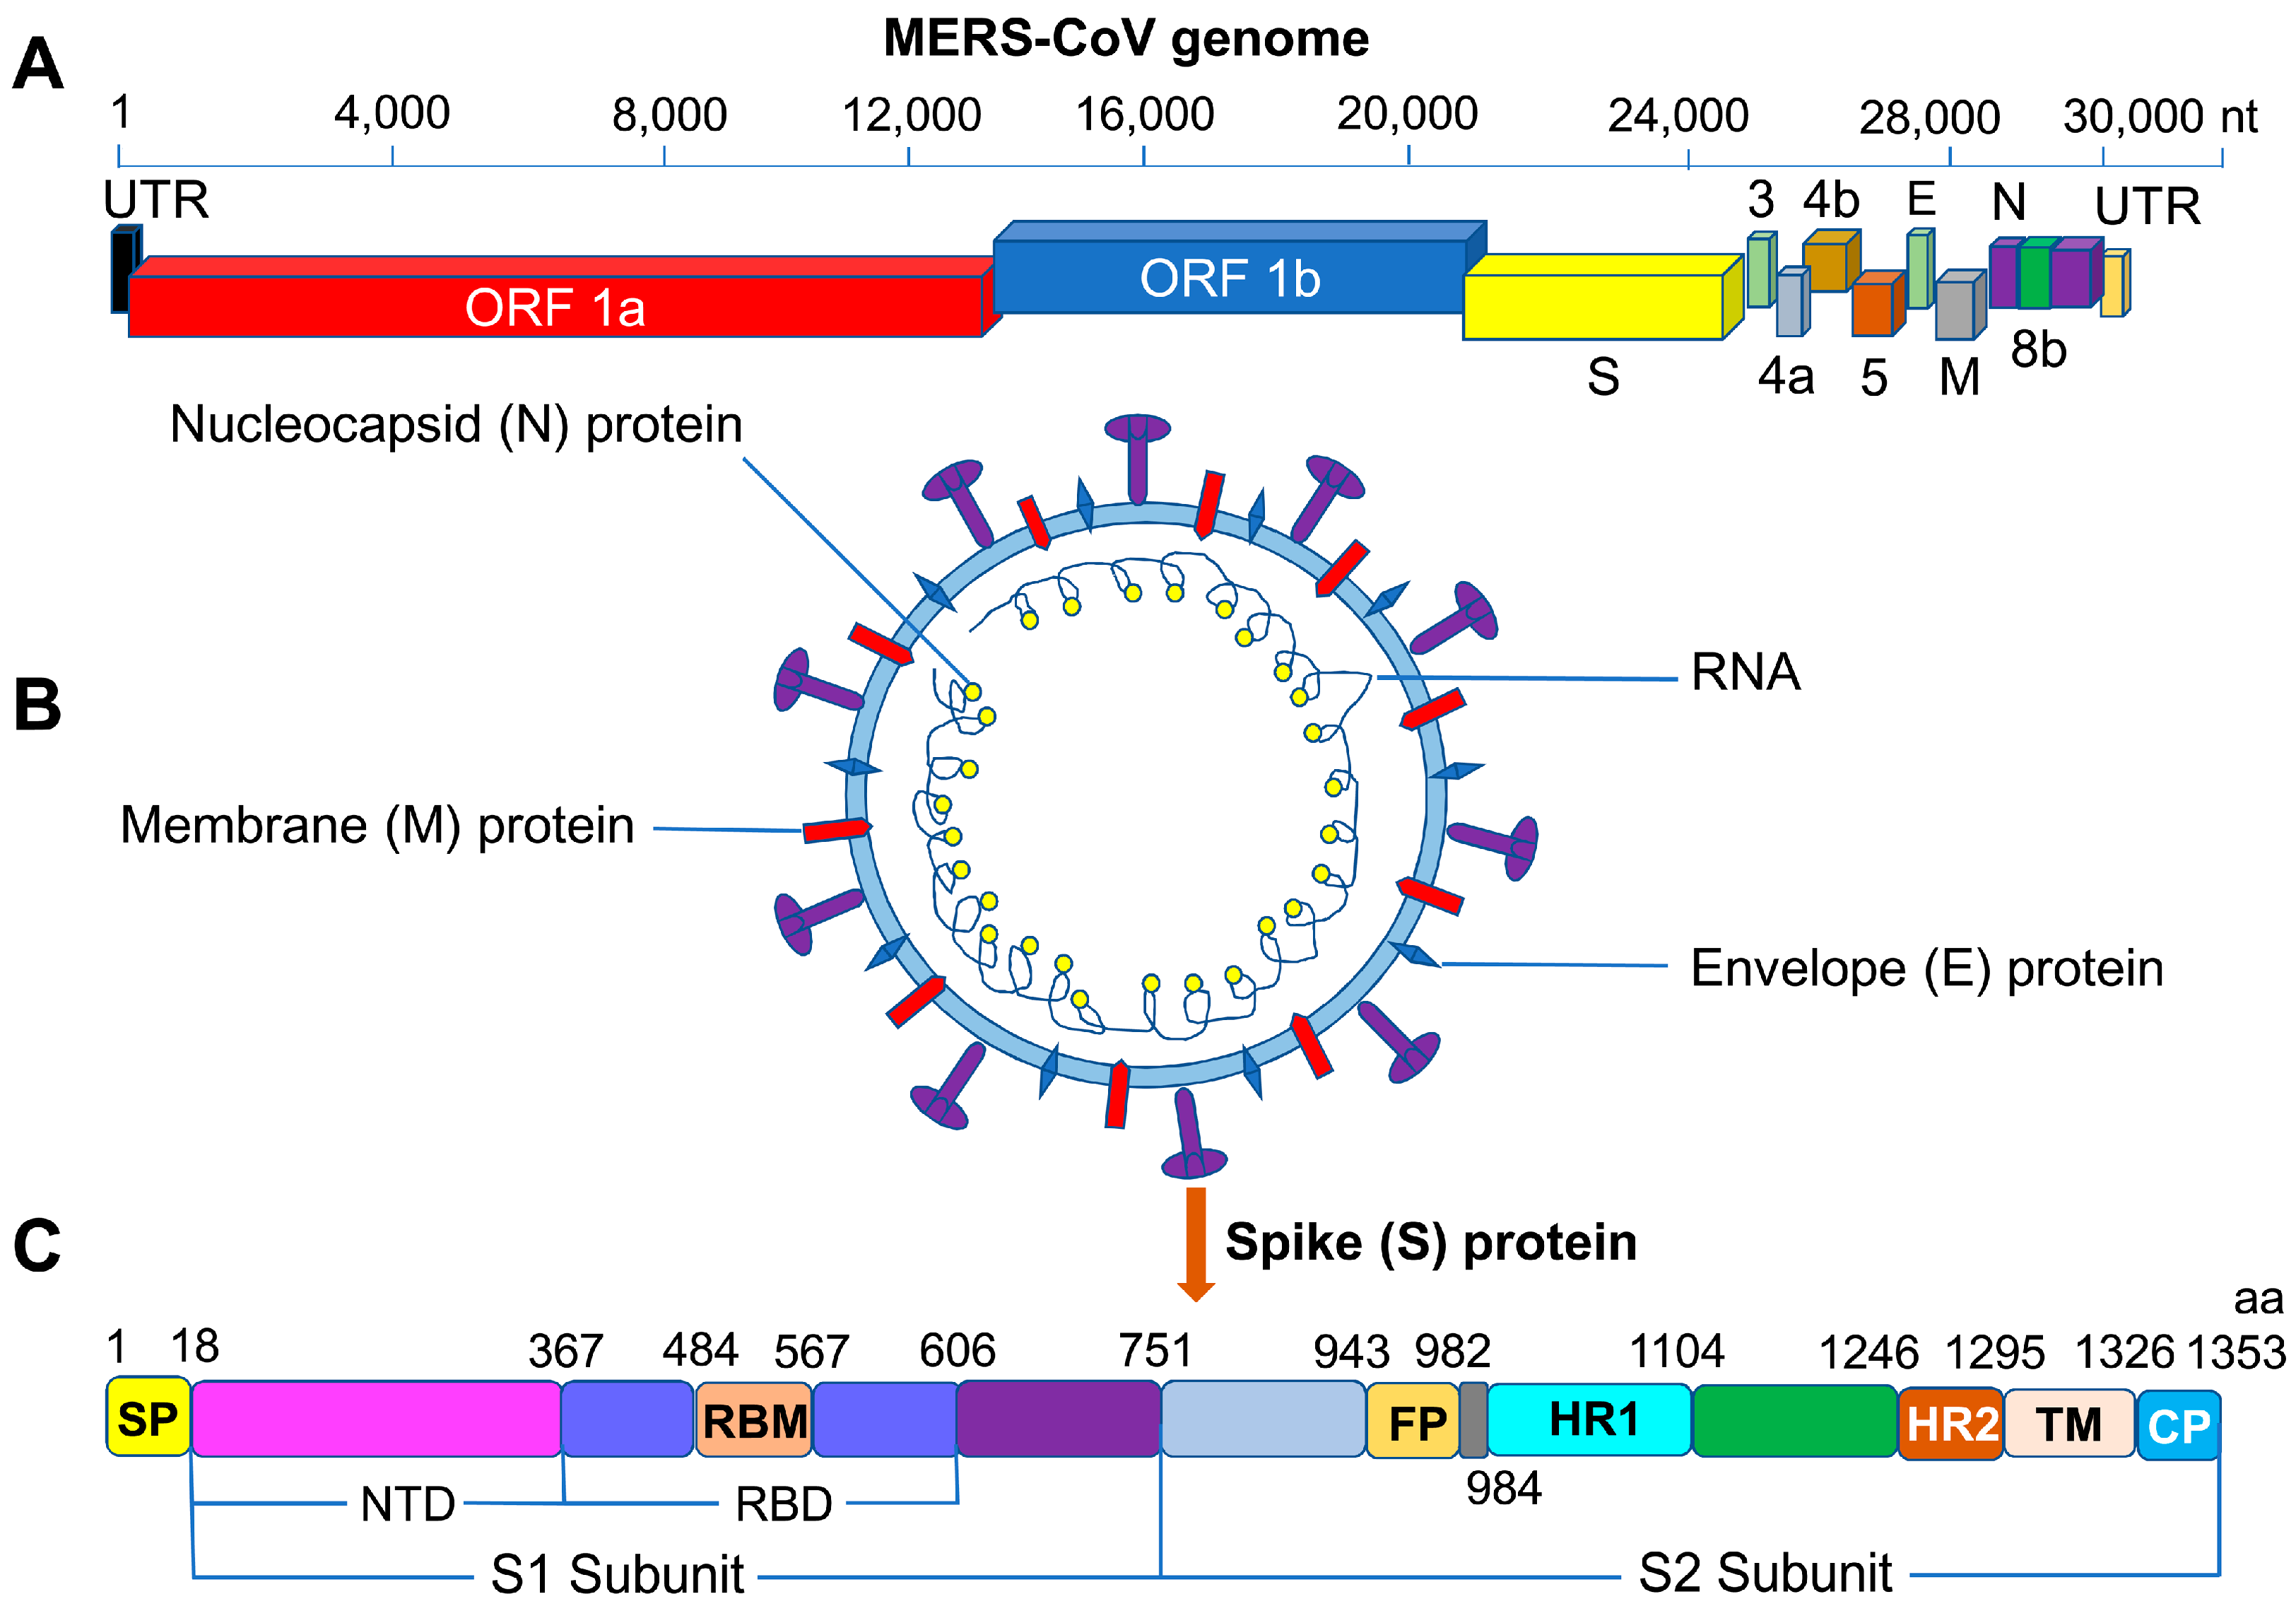 Viruses | Free Full-Text | Advances in MERS-CoV Vaccines and Therapeutics Based on the ...3249 x 2279